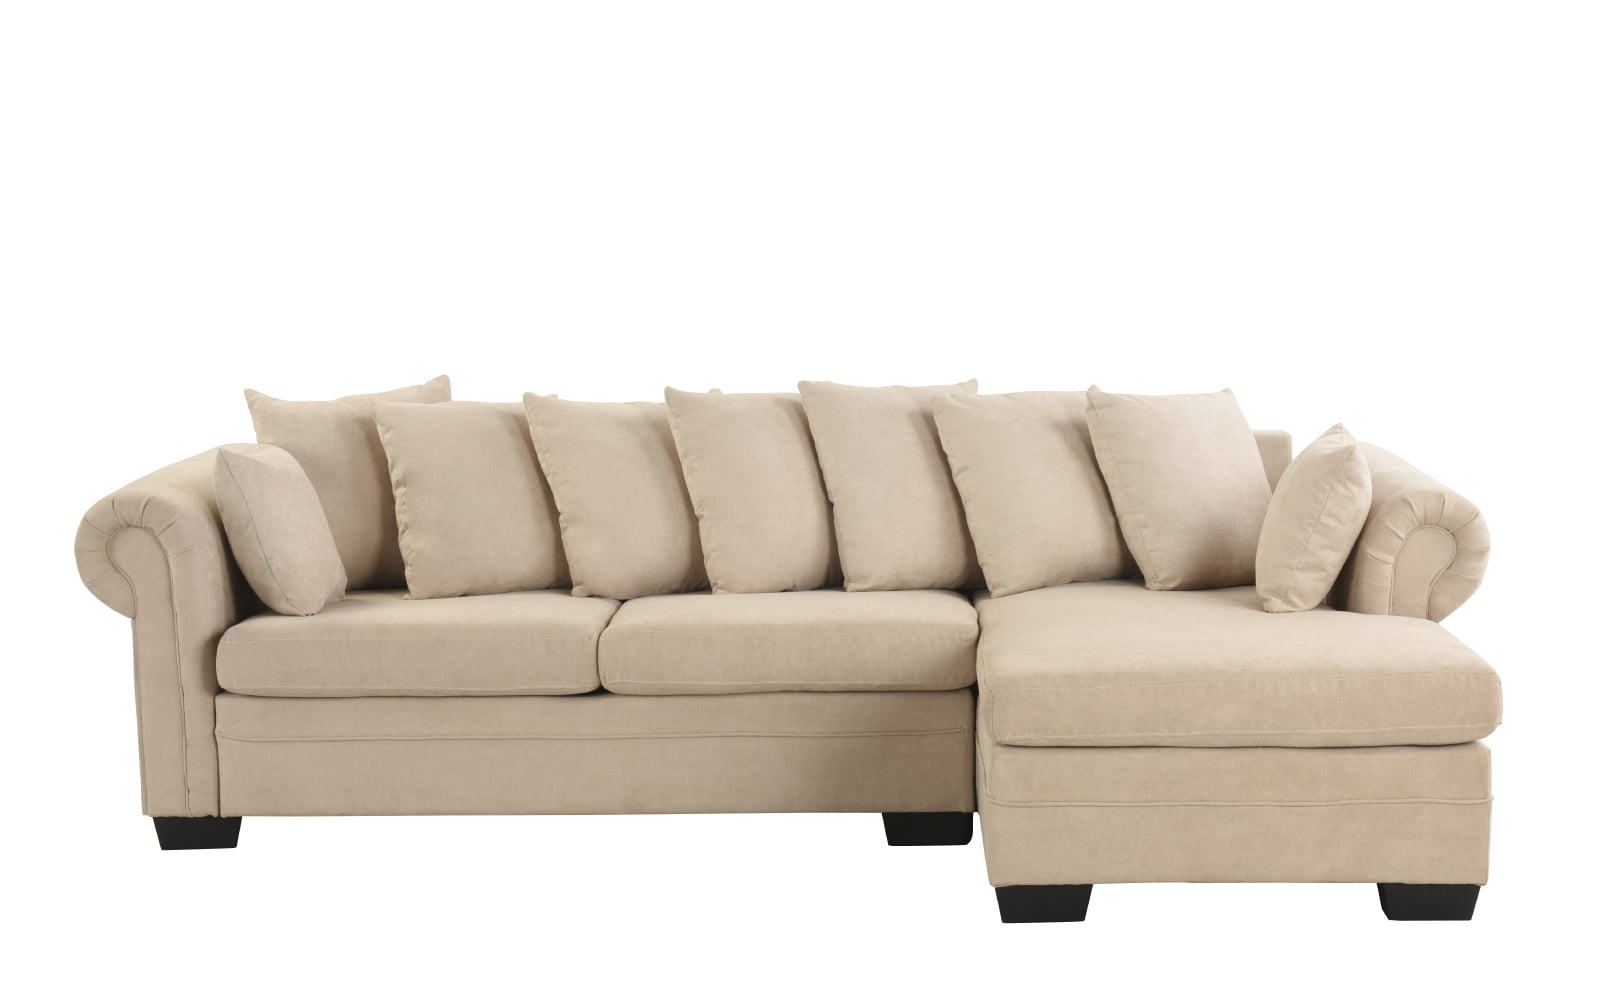 Traditional Modern Fabric Sectional Sofa L Shape Couch Wide Chaise Lounge Beige 